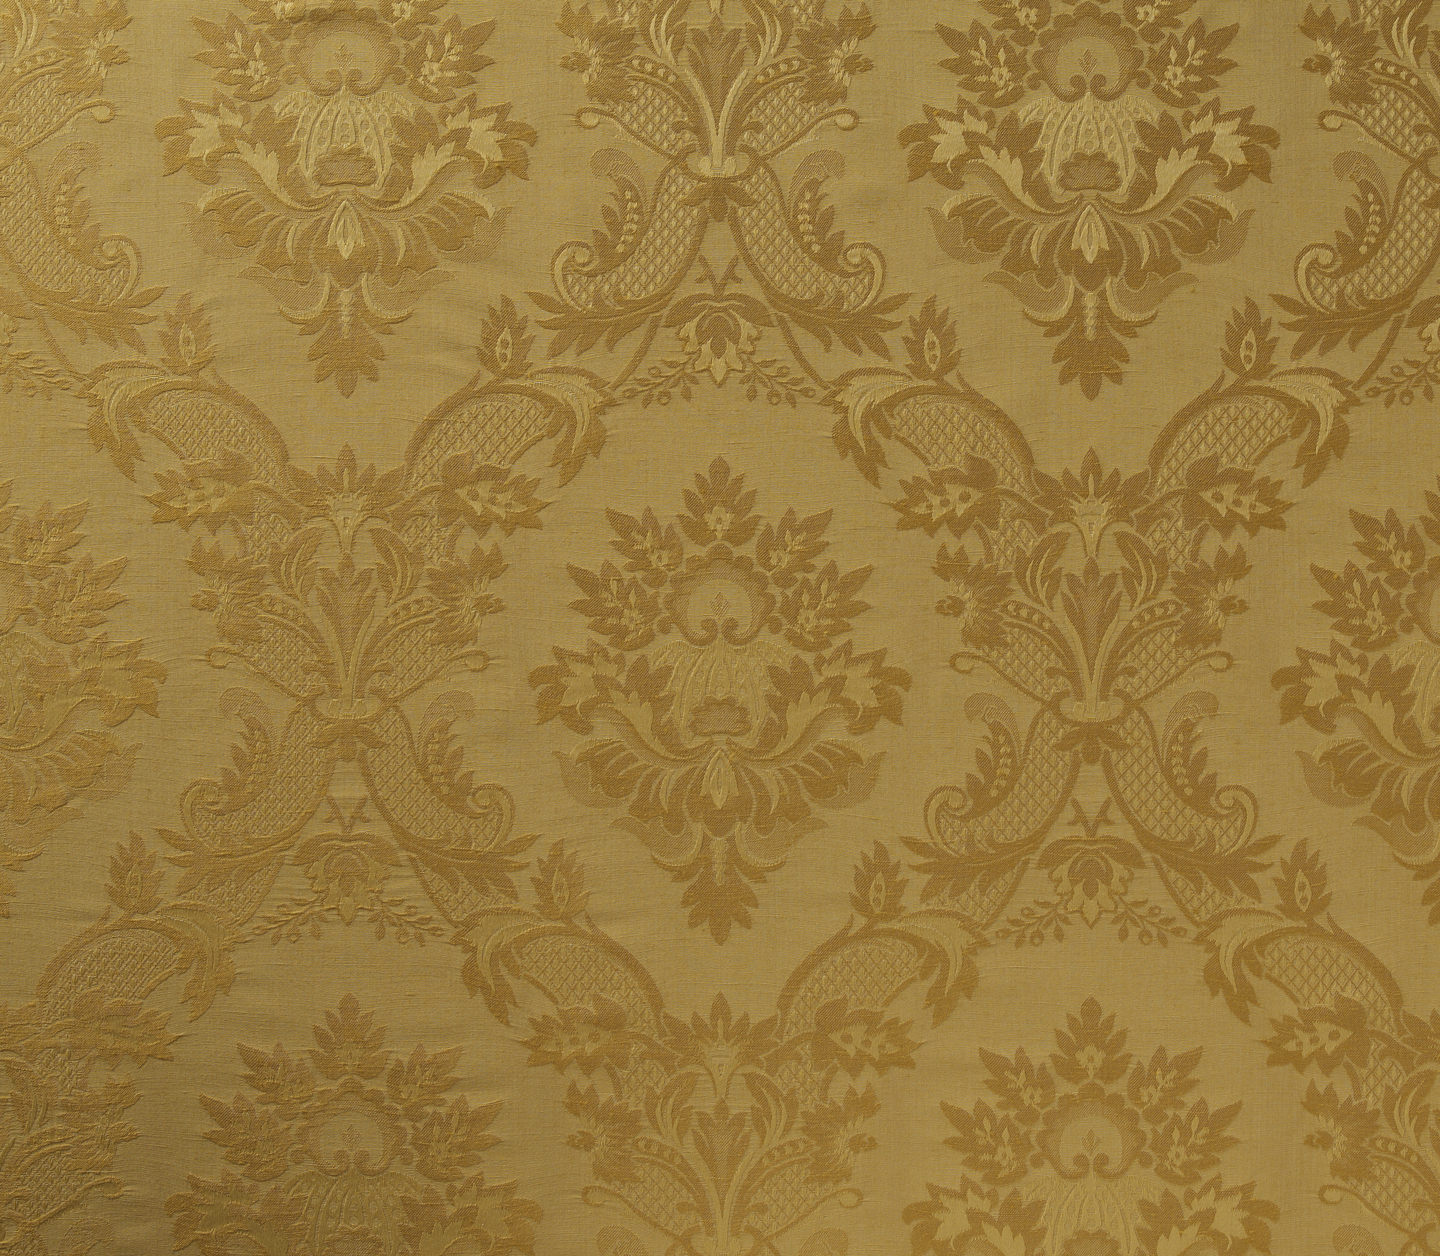 Pictures Of Pink Gold Damask Wallpaper